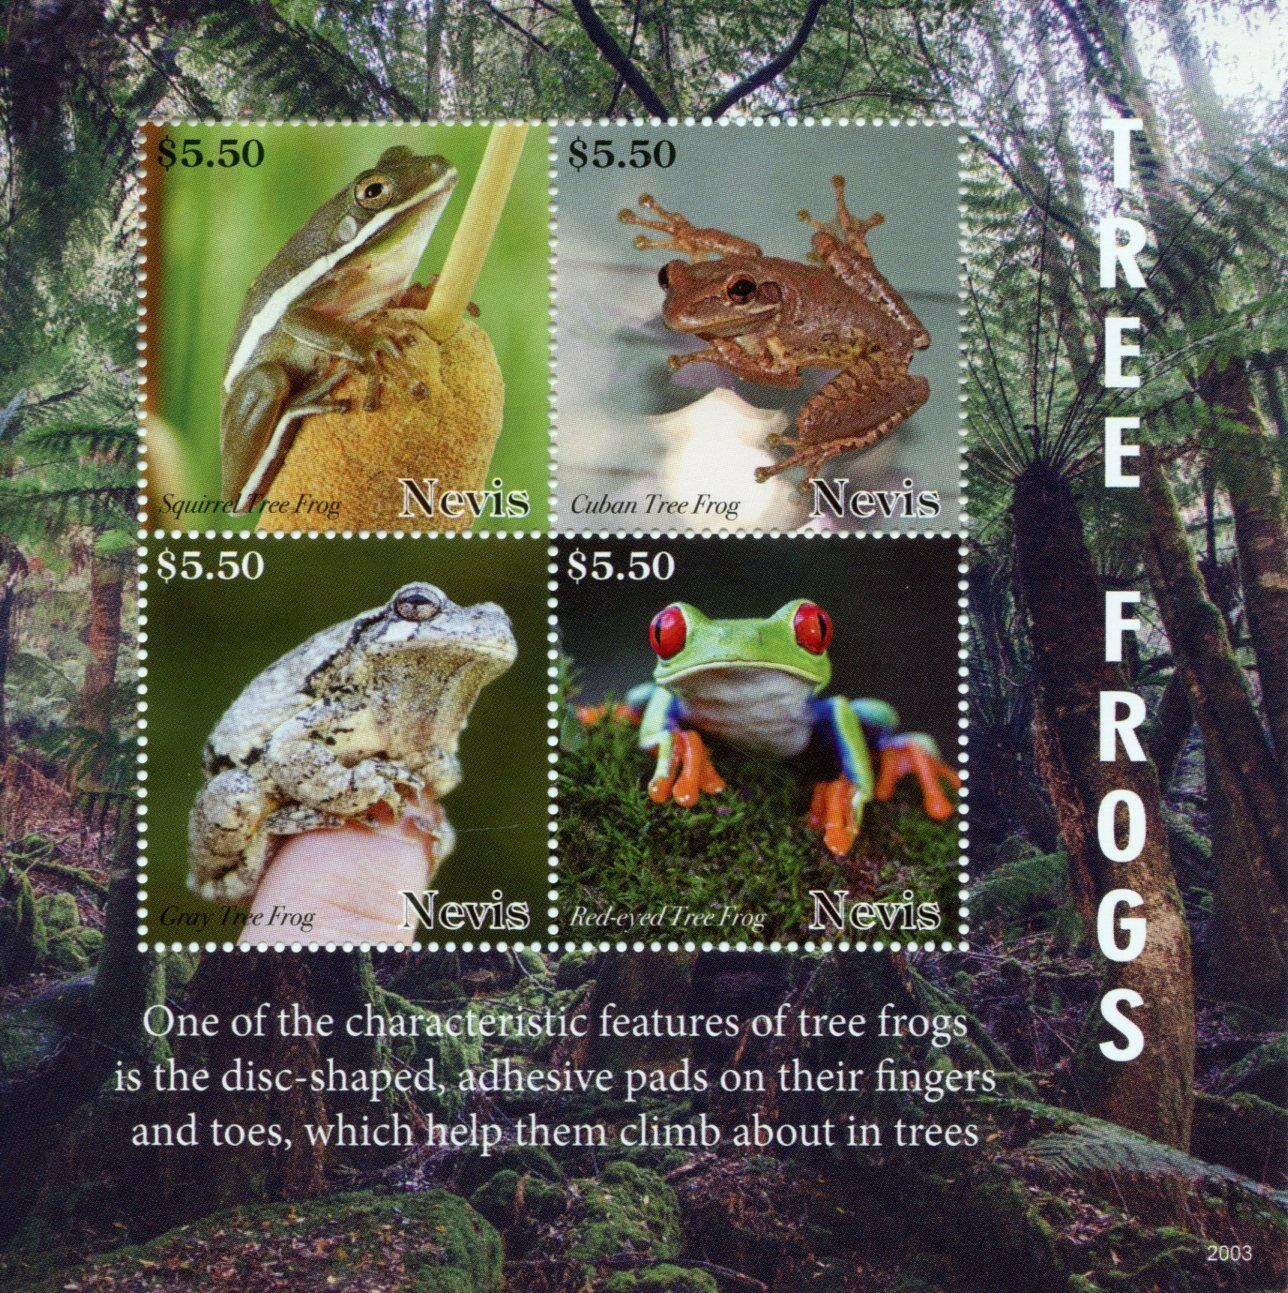 Nevis 2020 MNH Amphibians Stamps Tree Frogs Red-Eyed Tree Frog 4v M/S